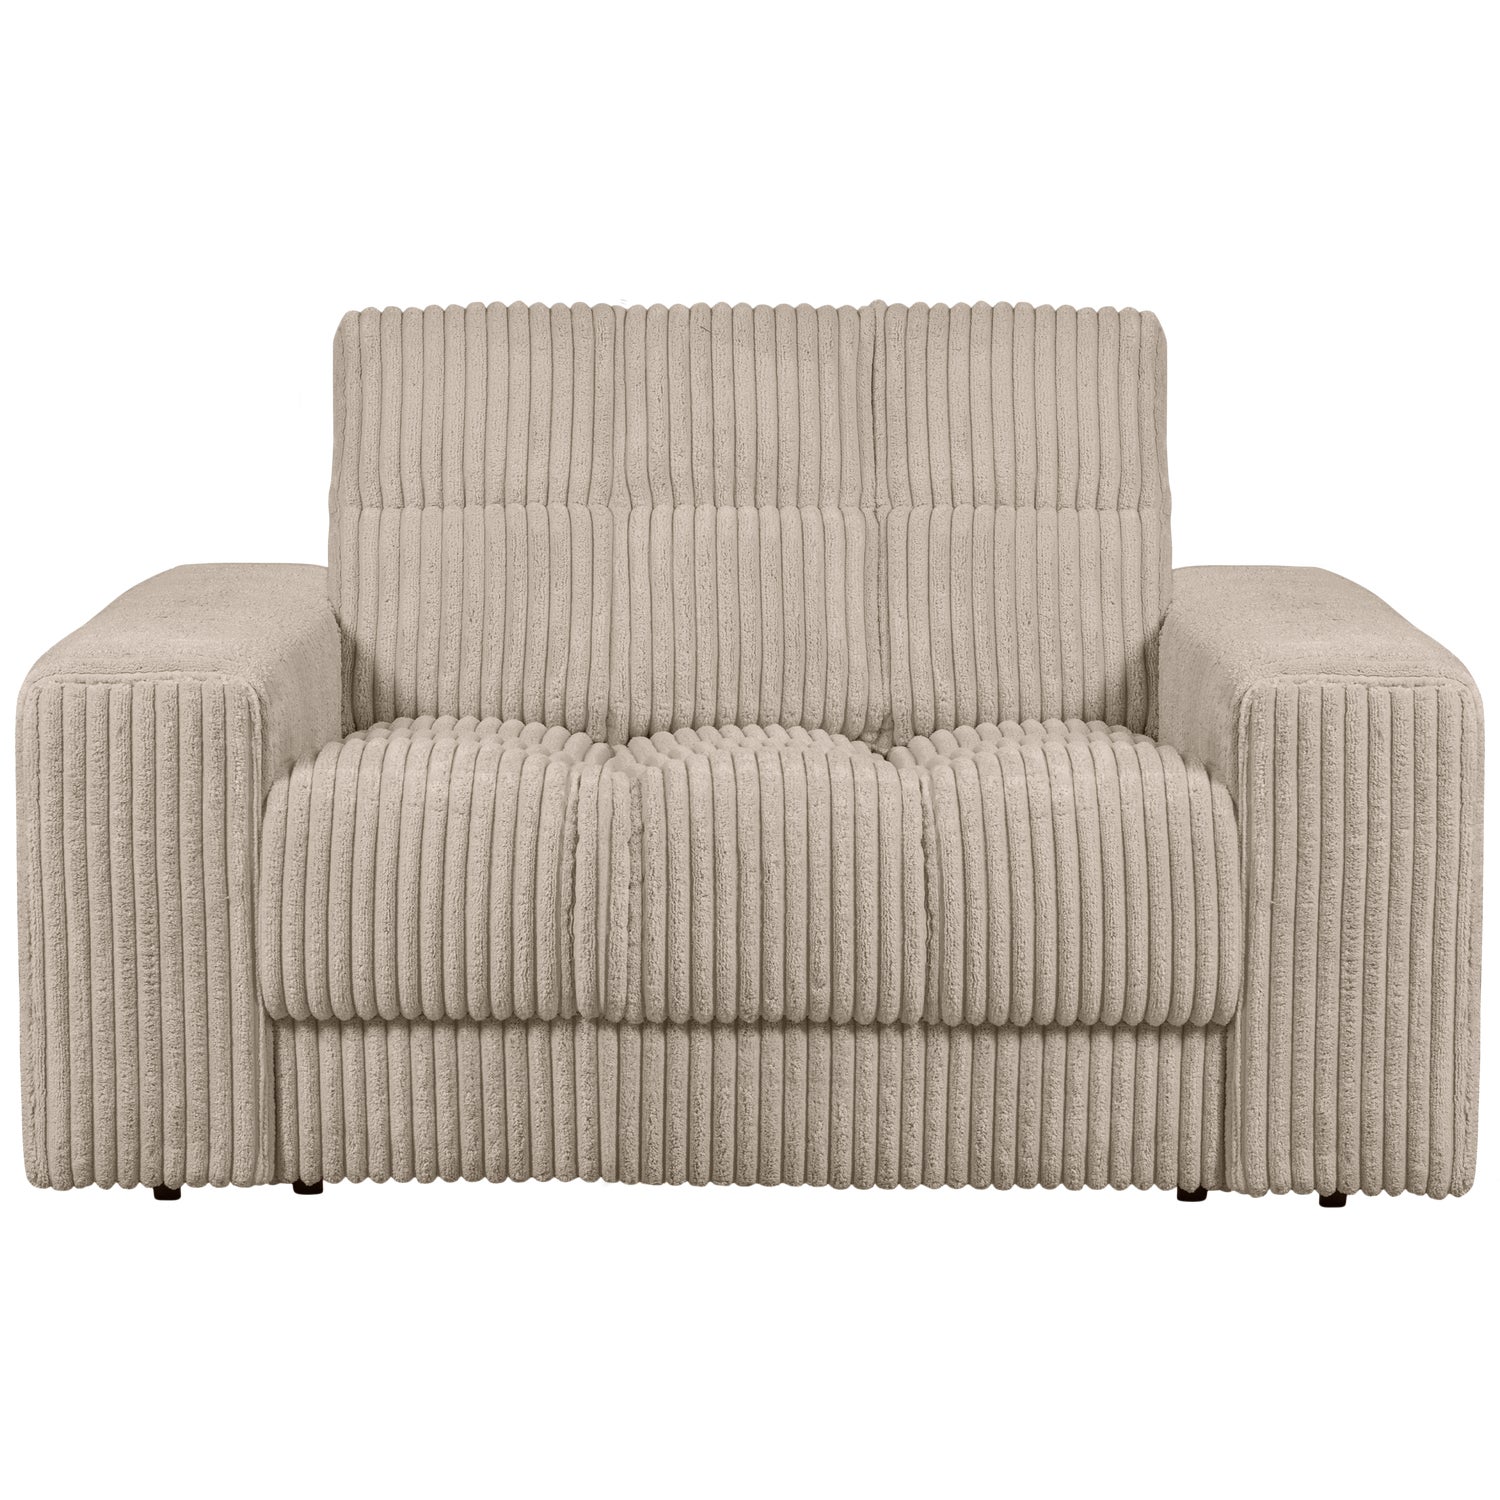 379006-RR-01_VS_WE_Second_date_loveseat_grove_ribstof_travertin.png?auto=webp&format=png&width=1500&height=1500